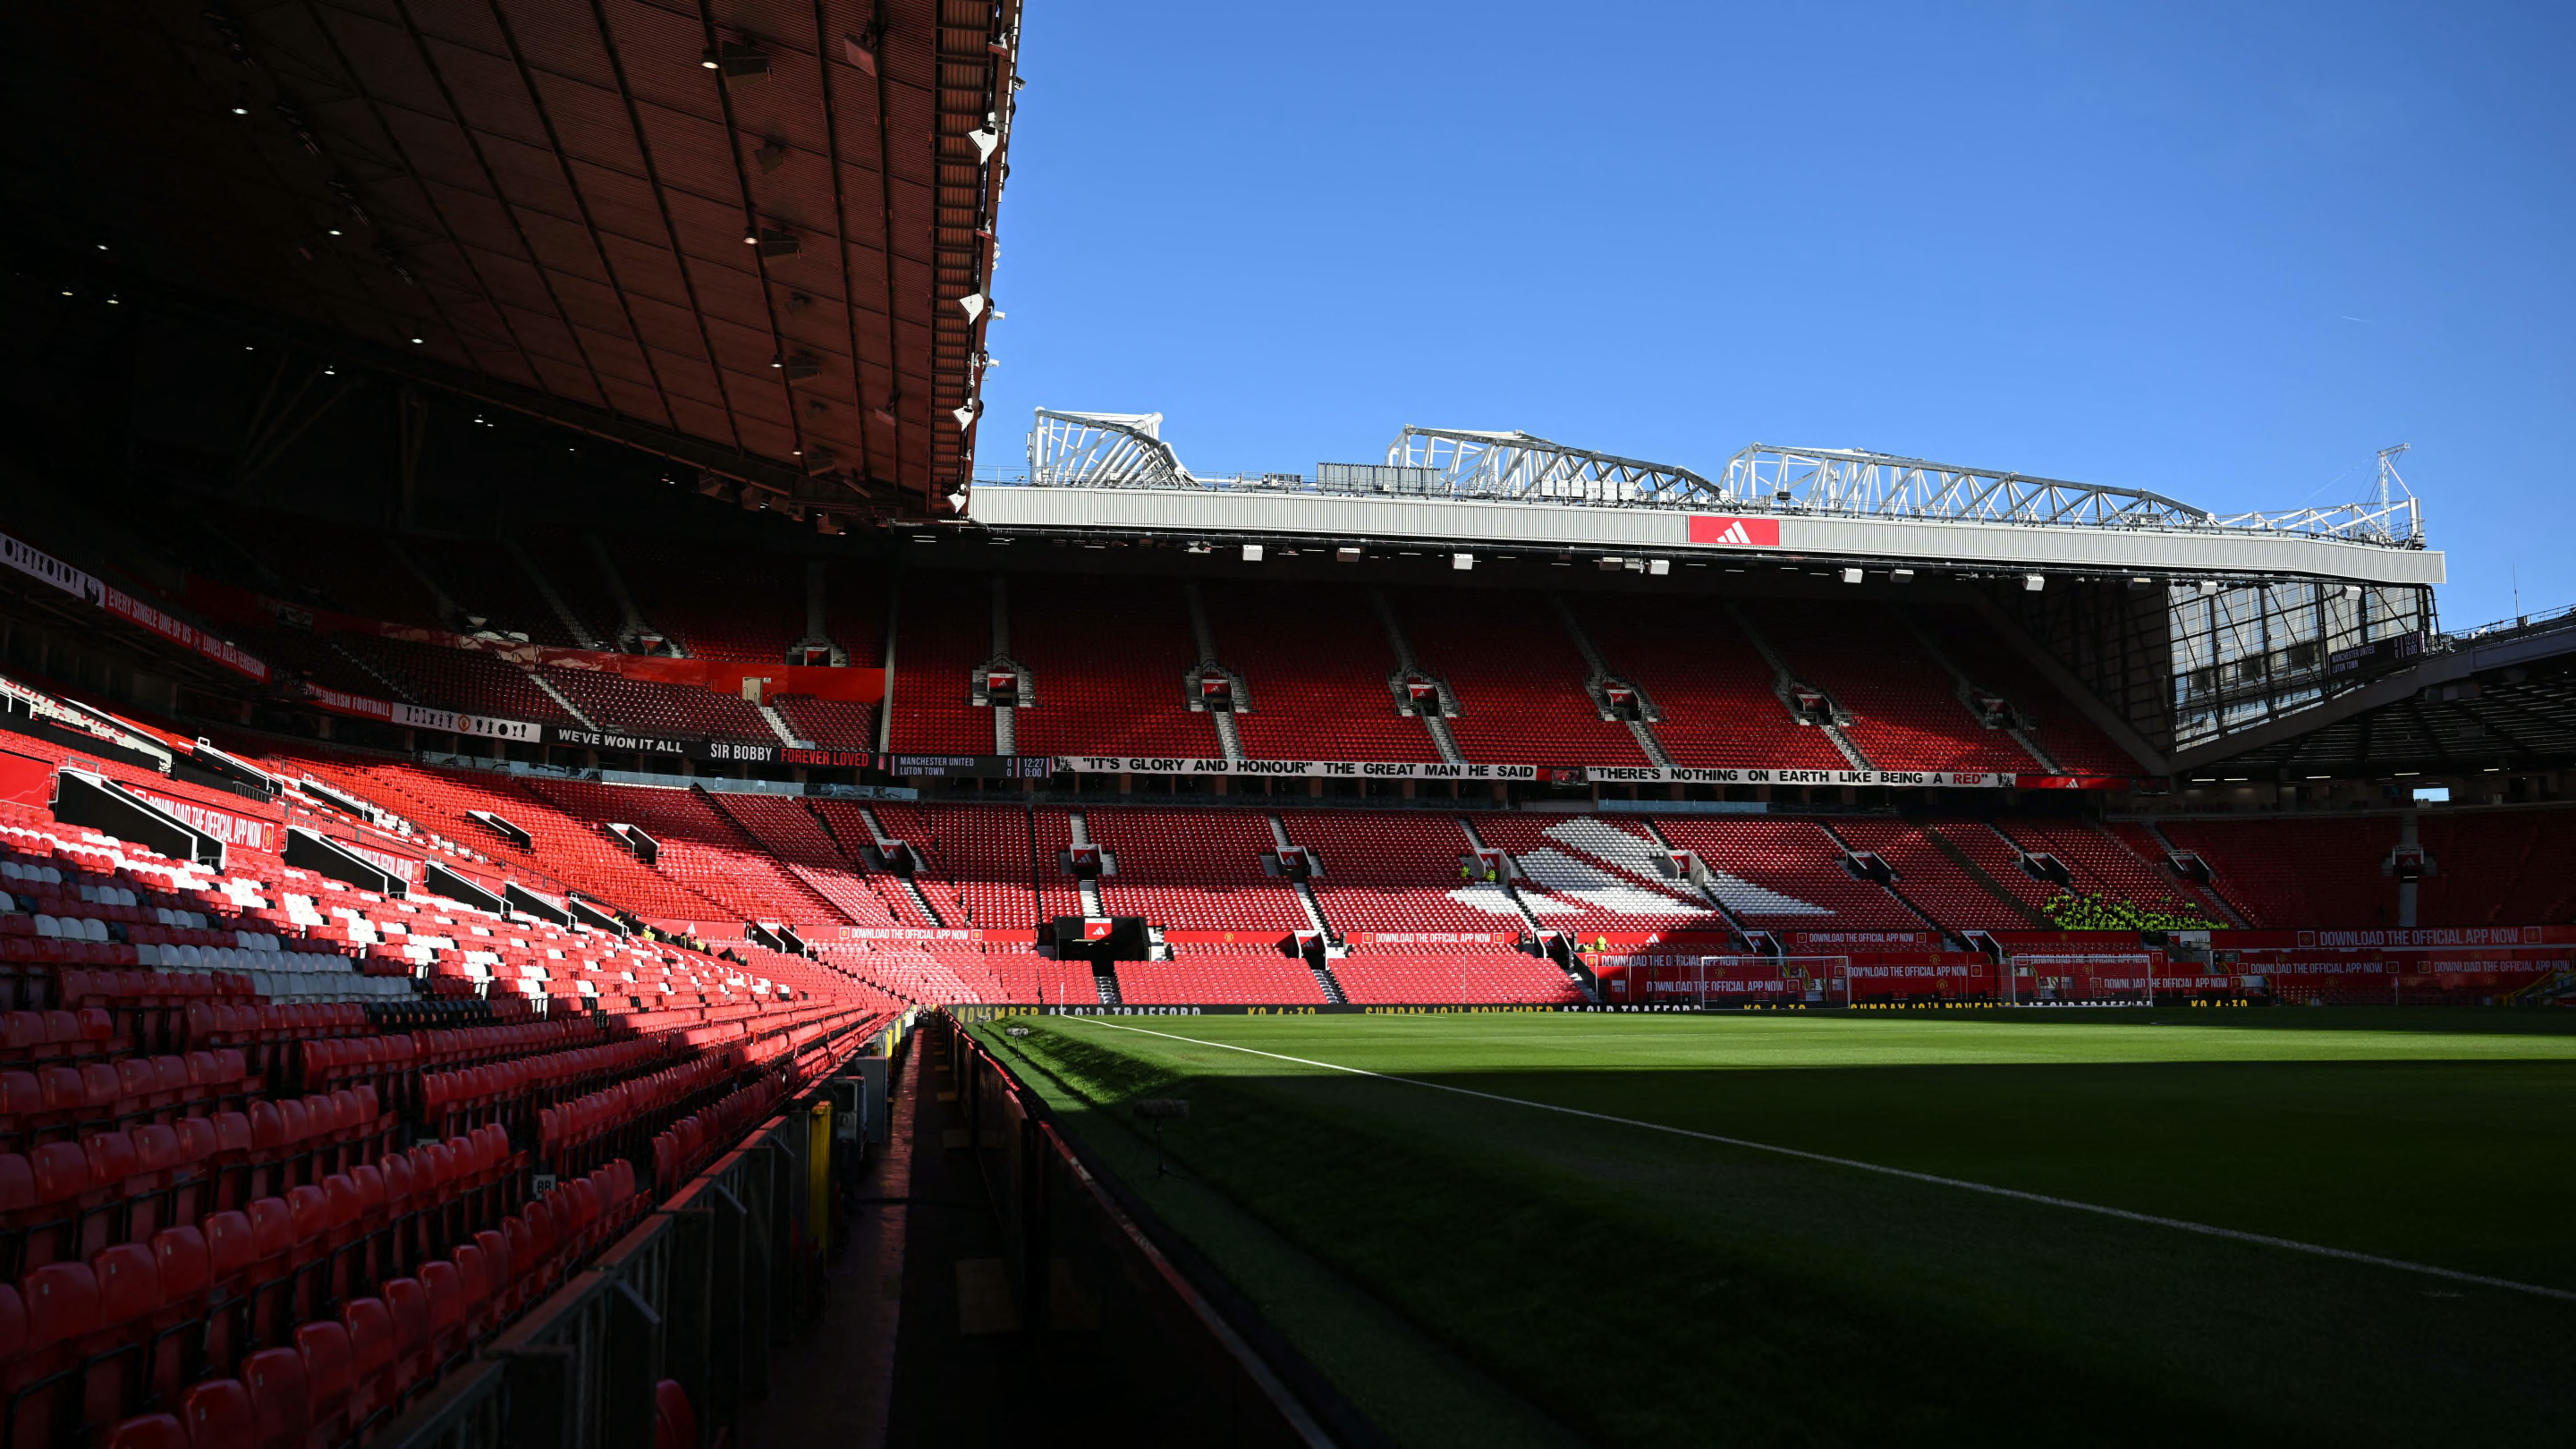 Man Utd announce 'changes to executive leadership'